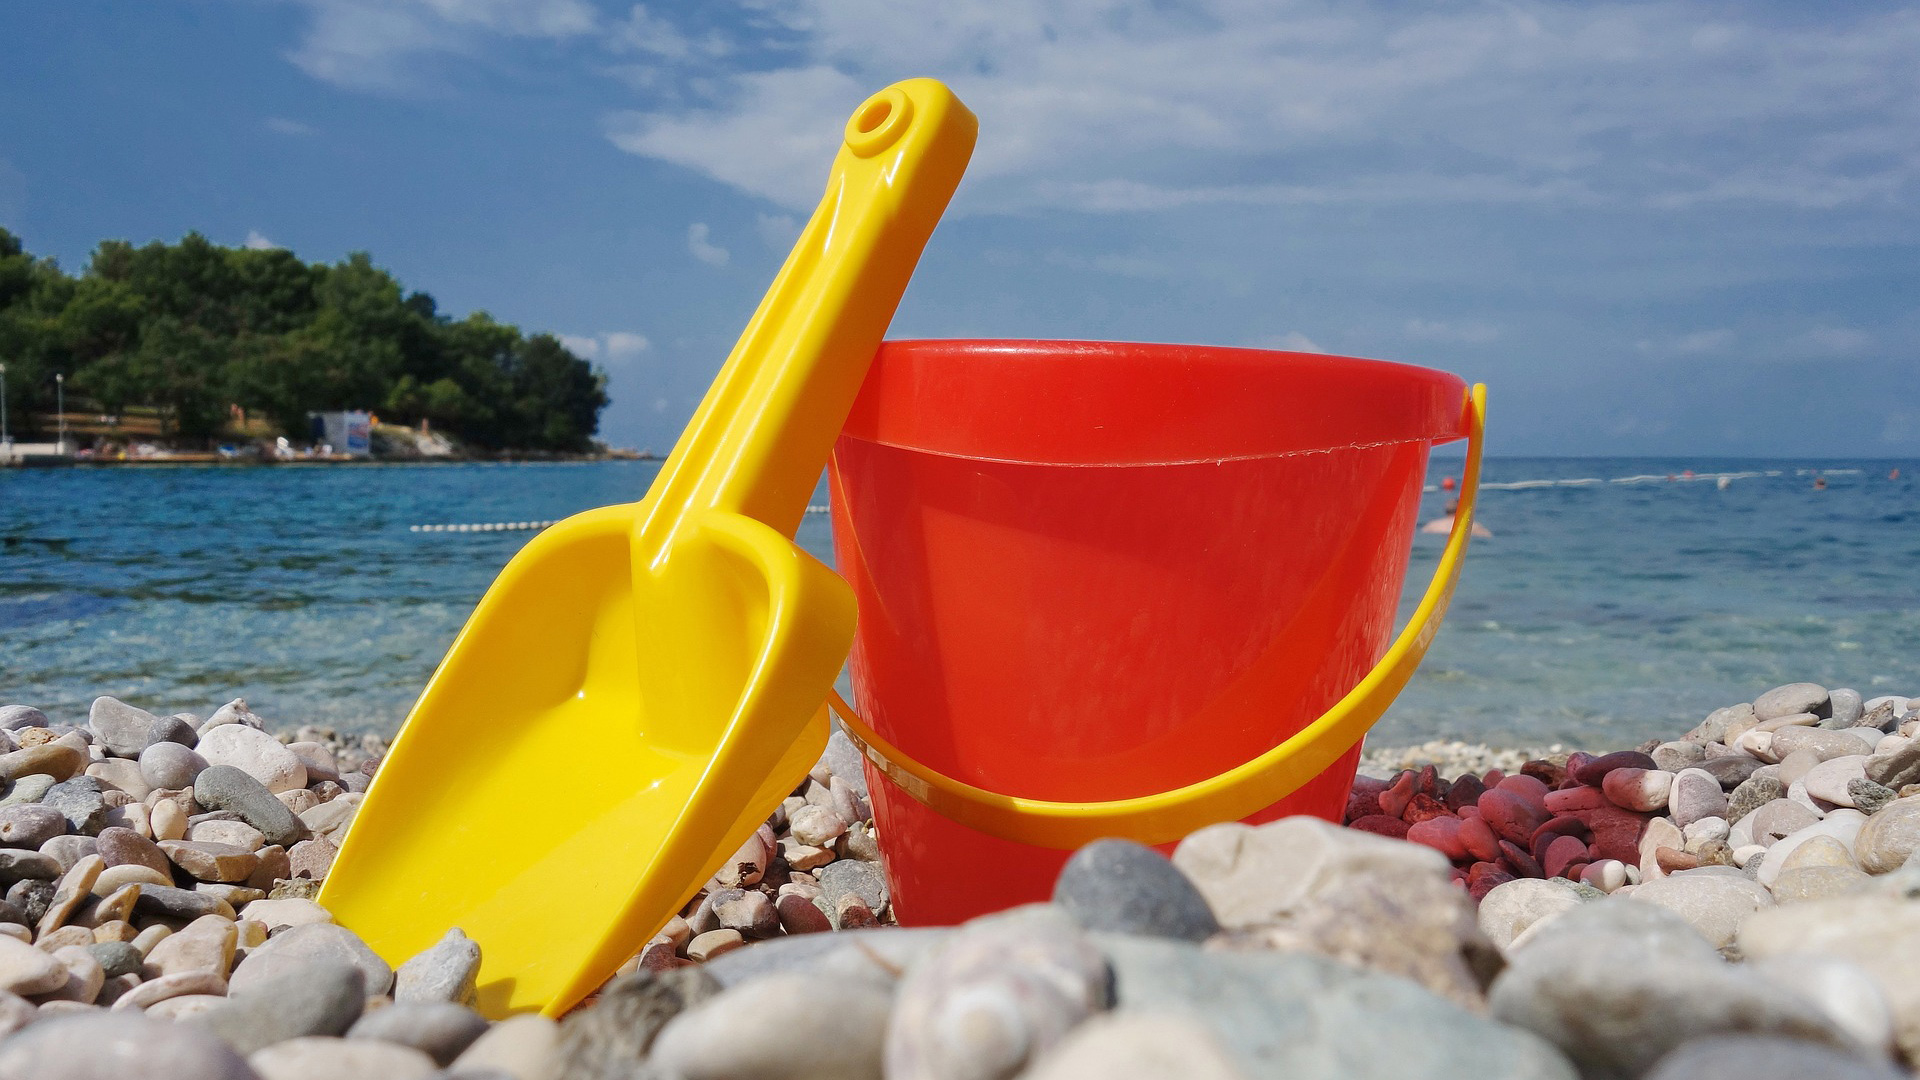 A yellow spade and red bucket on a pebble beach